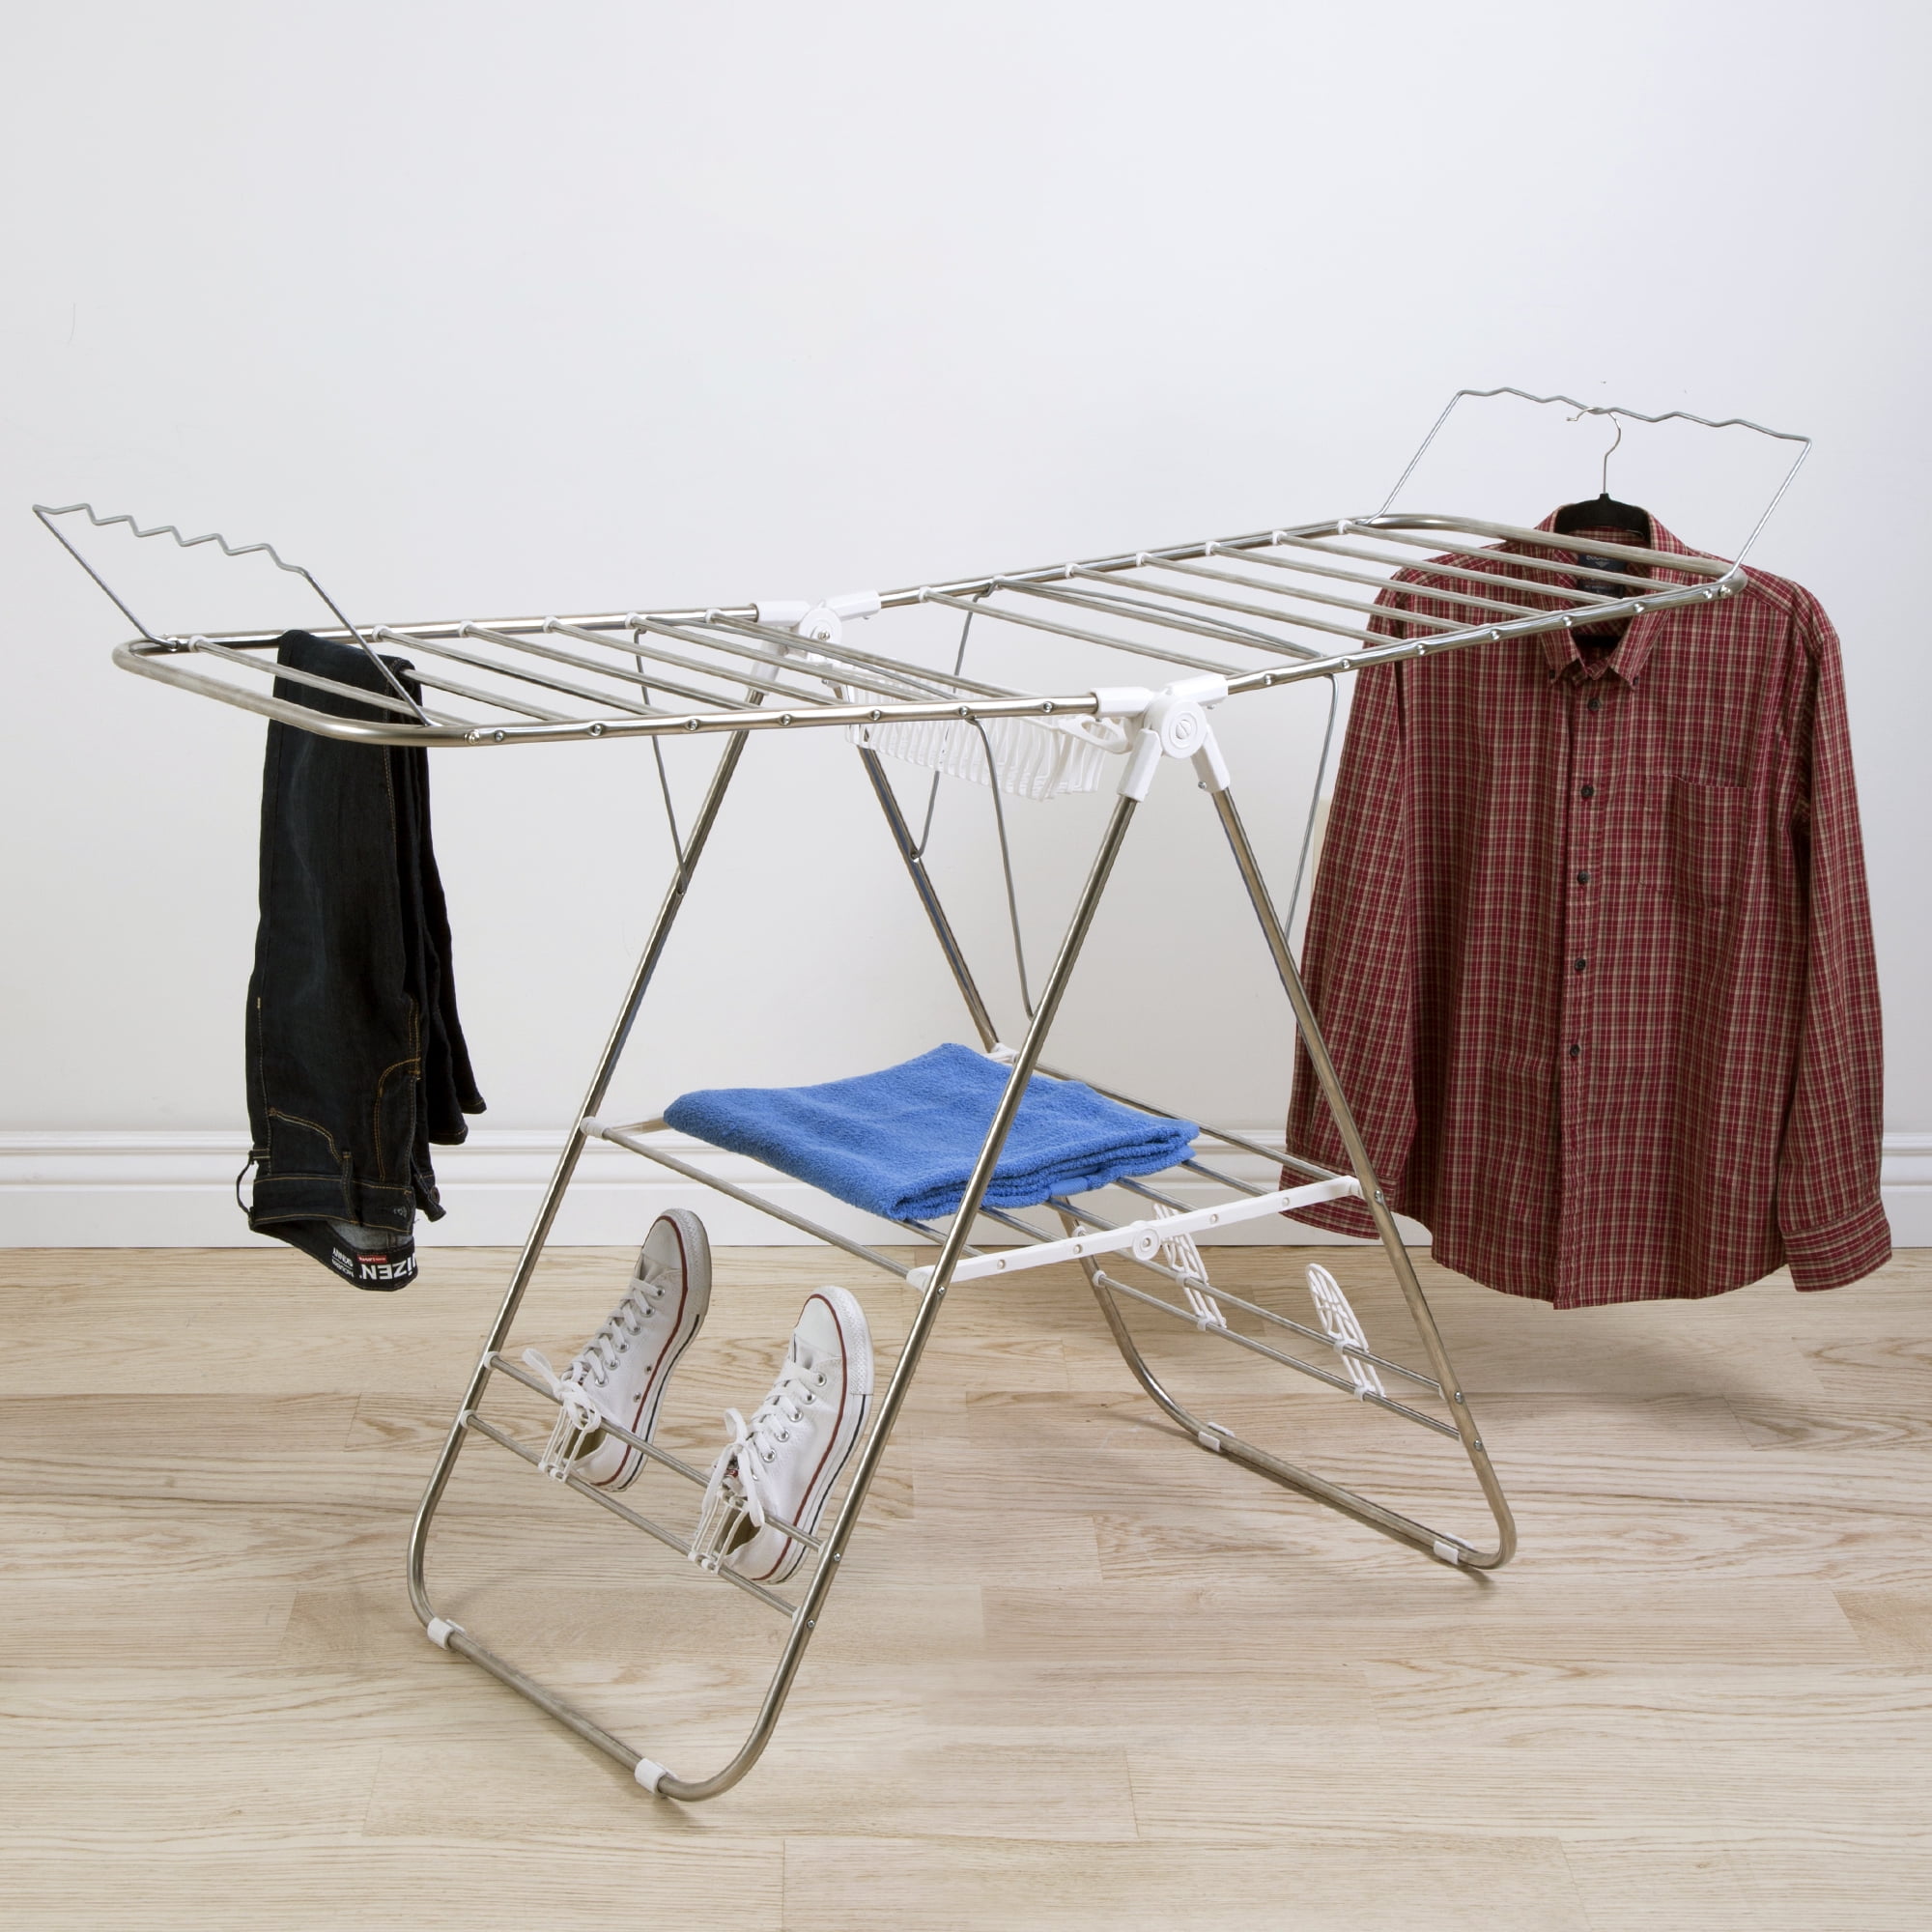 Details about   Clothes Drying Rack Laundry Hanger Dryer Indoor Outdoor Storage Stand Portable 